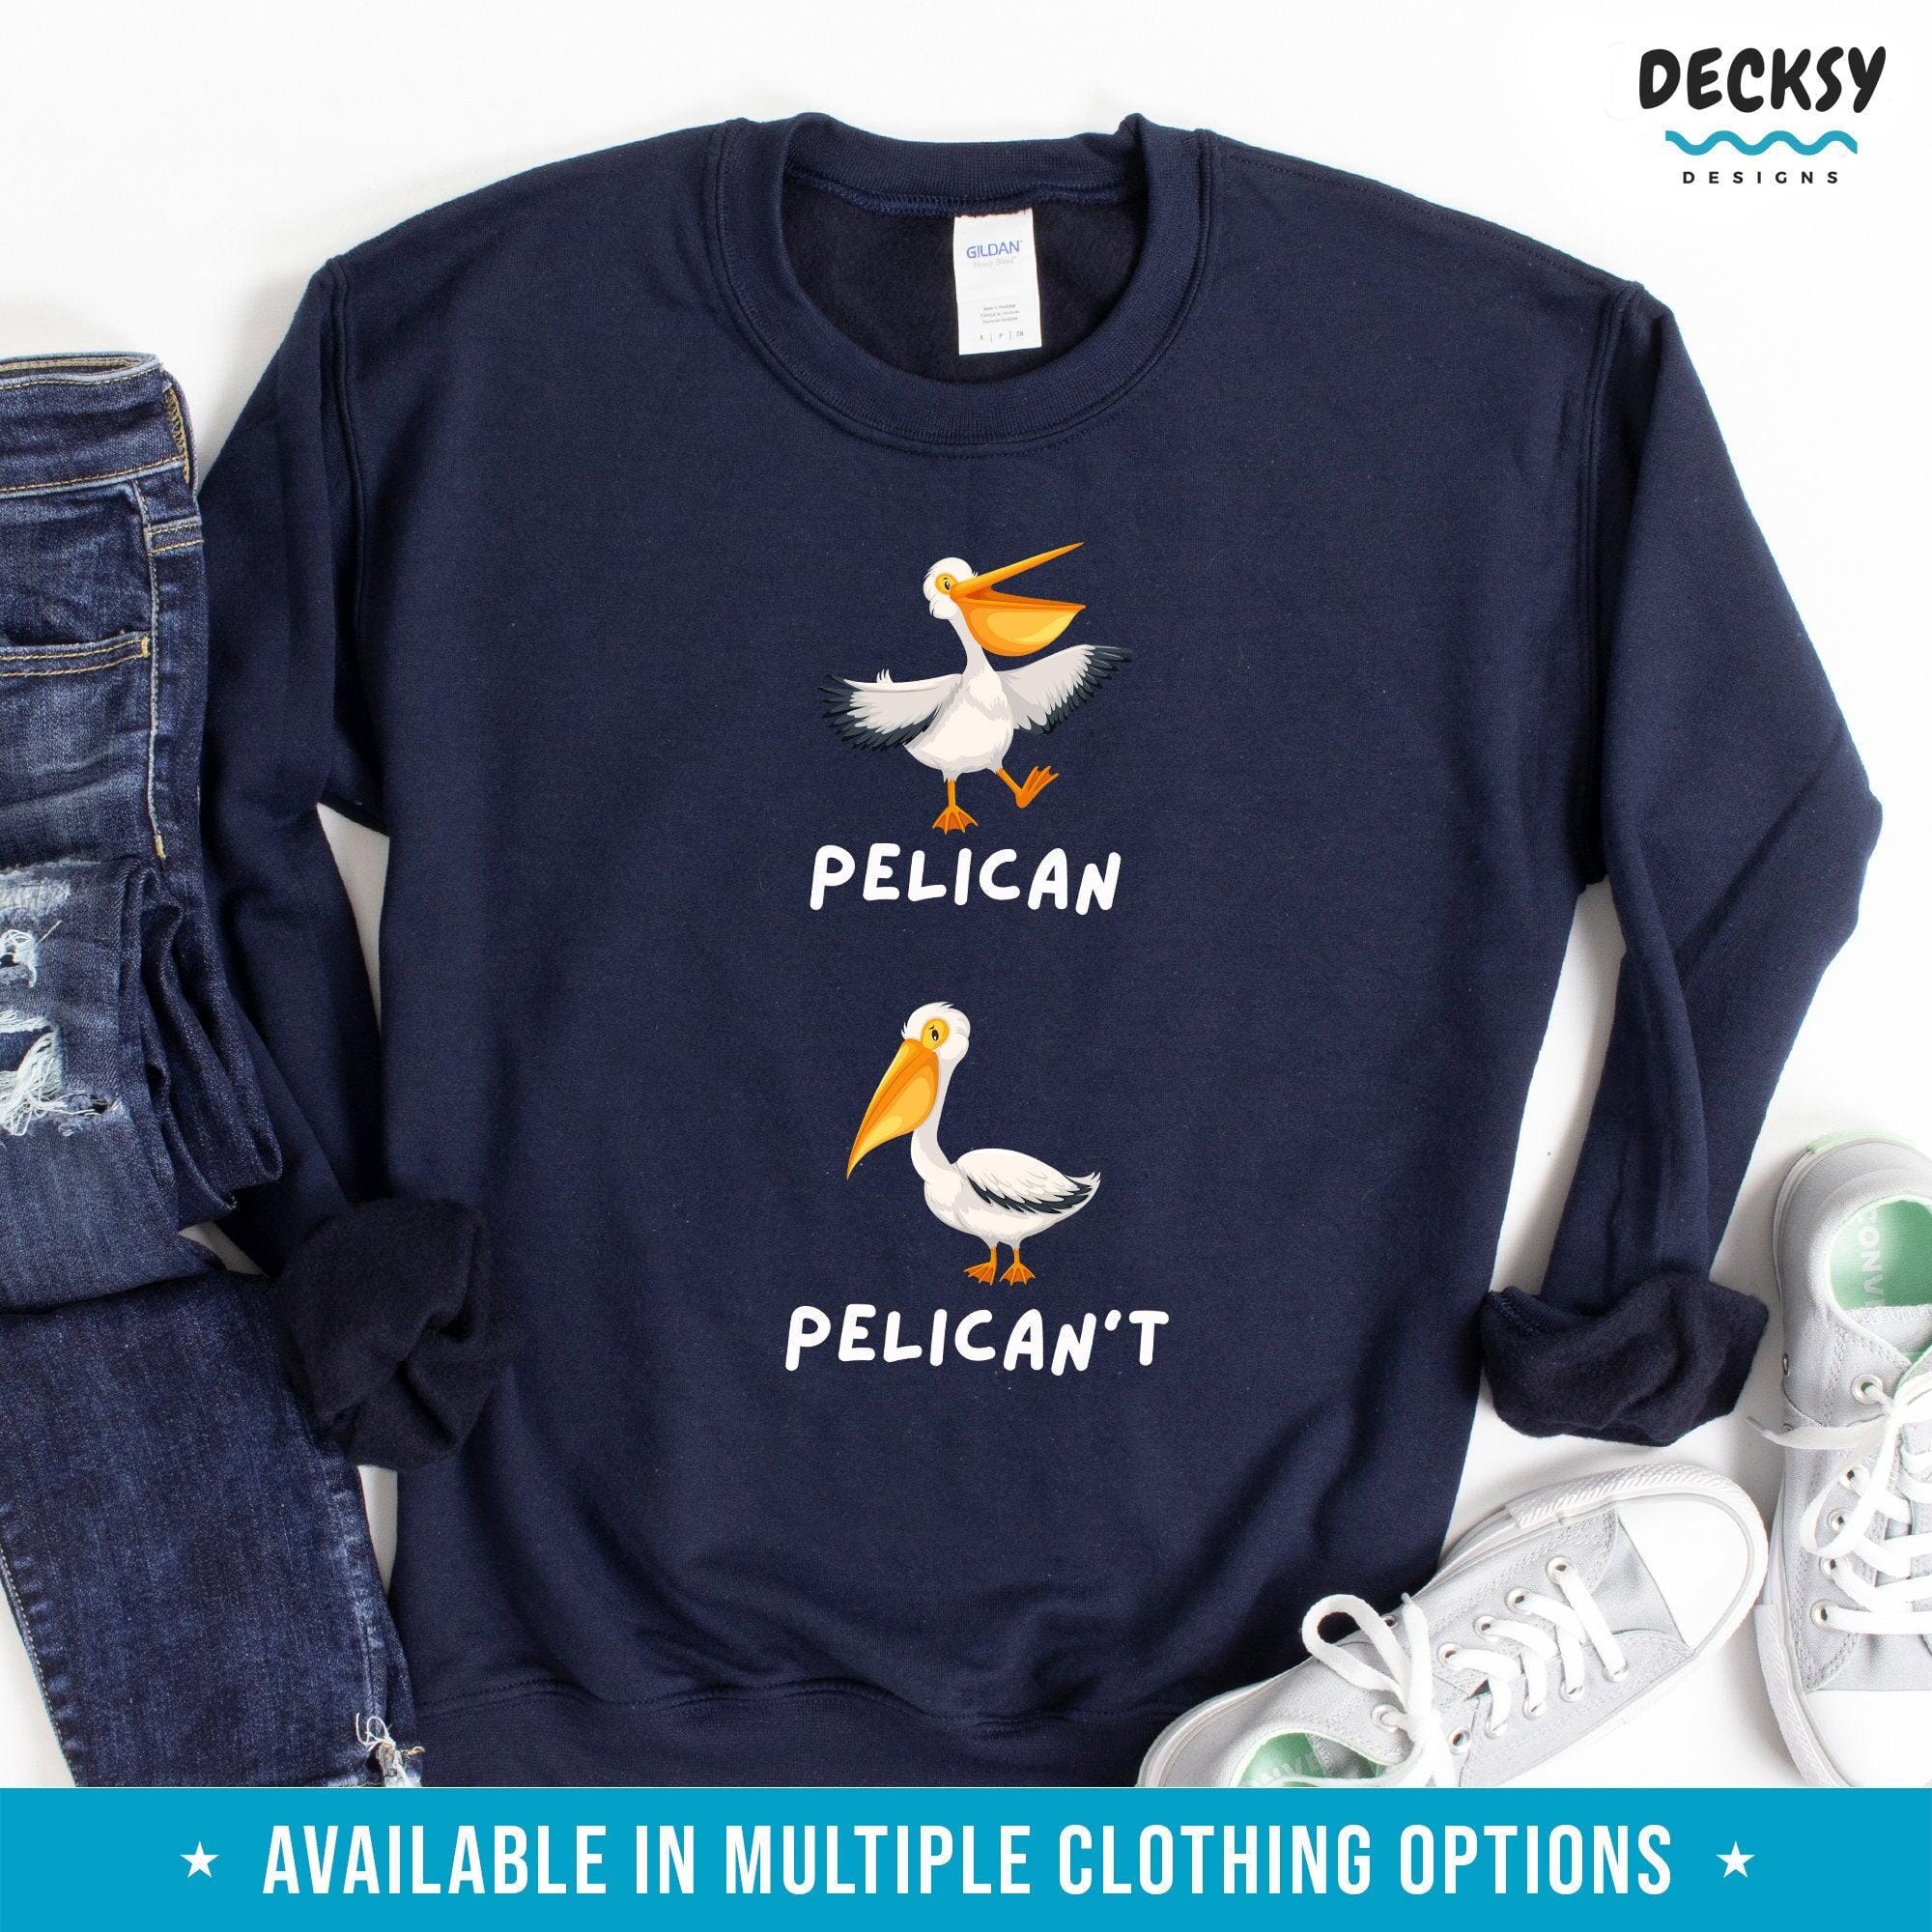 Pelican Tshirt, Funny Gift For Bird Lover-Clothing:Gender-Neutral Adult Clothing:Tops & Tees:T-shirts:Graphic Tees-DecksyDesigns